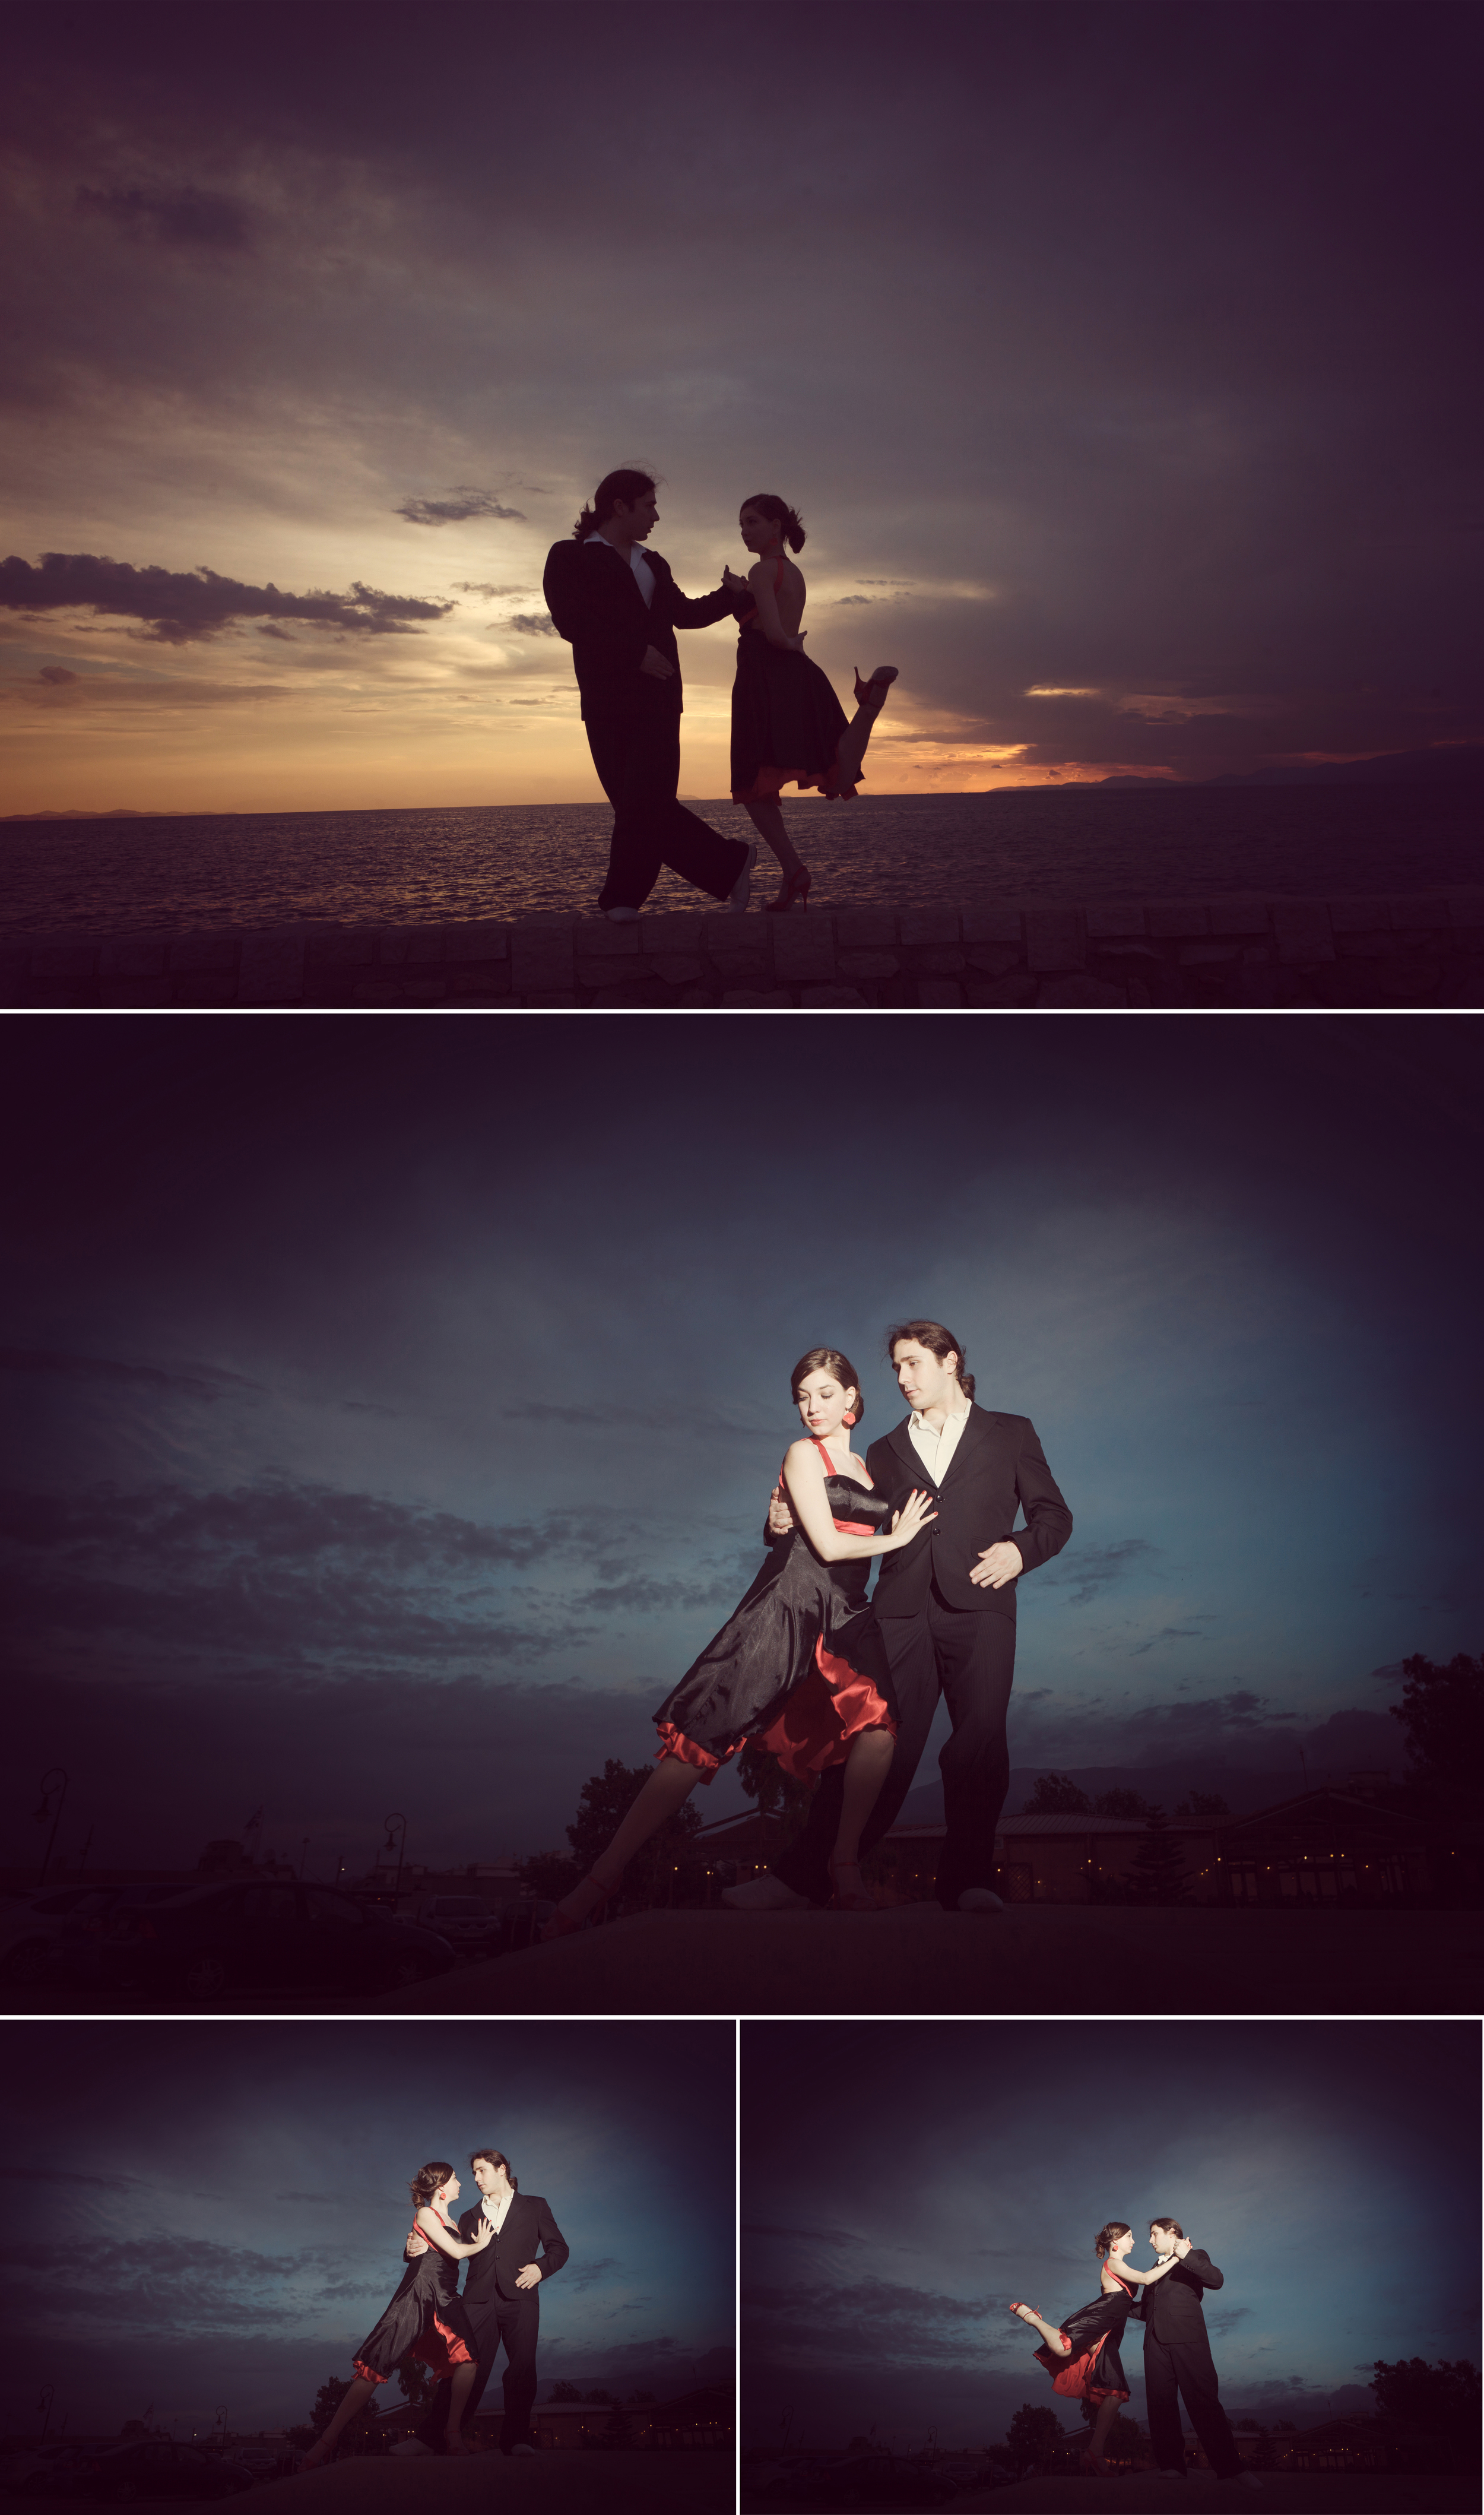 ANDRIOPOULOS_PHOTOGRAPHY TANGO 16.jpg